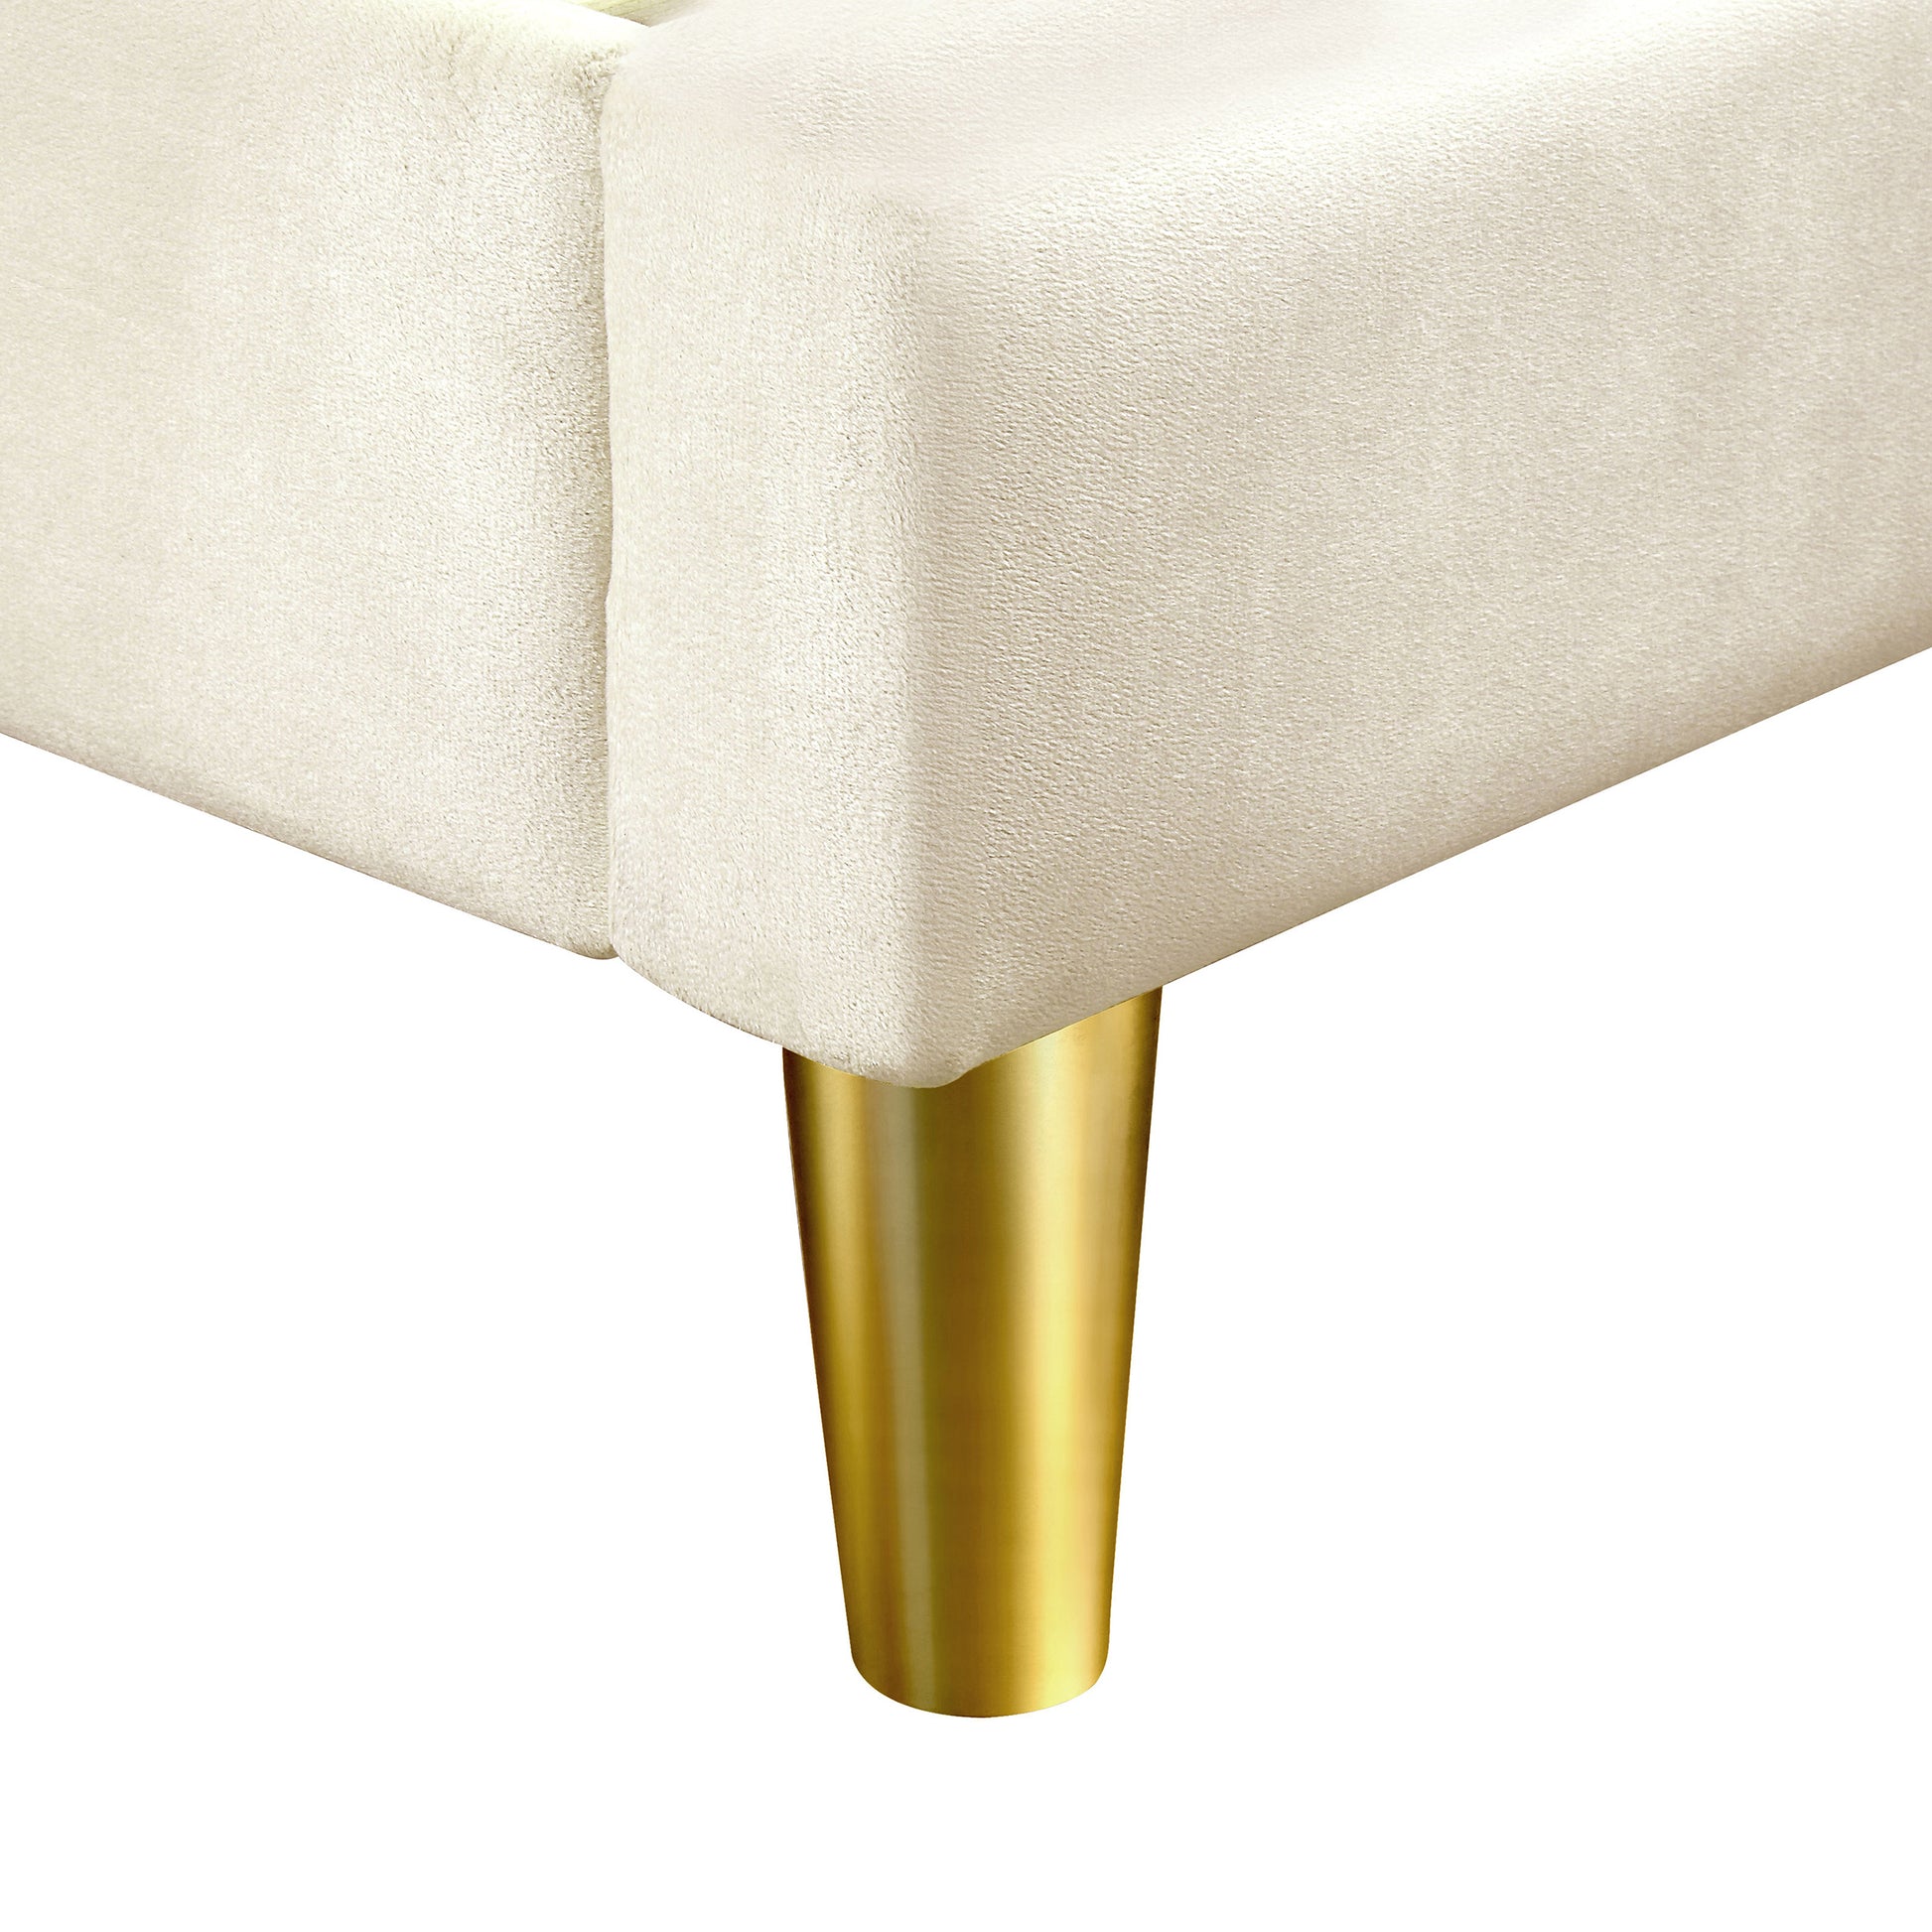 Right angled leg close-up view of a contemporary beige and gold upholstered full bed on a white background